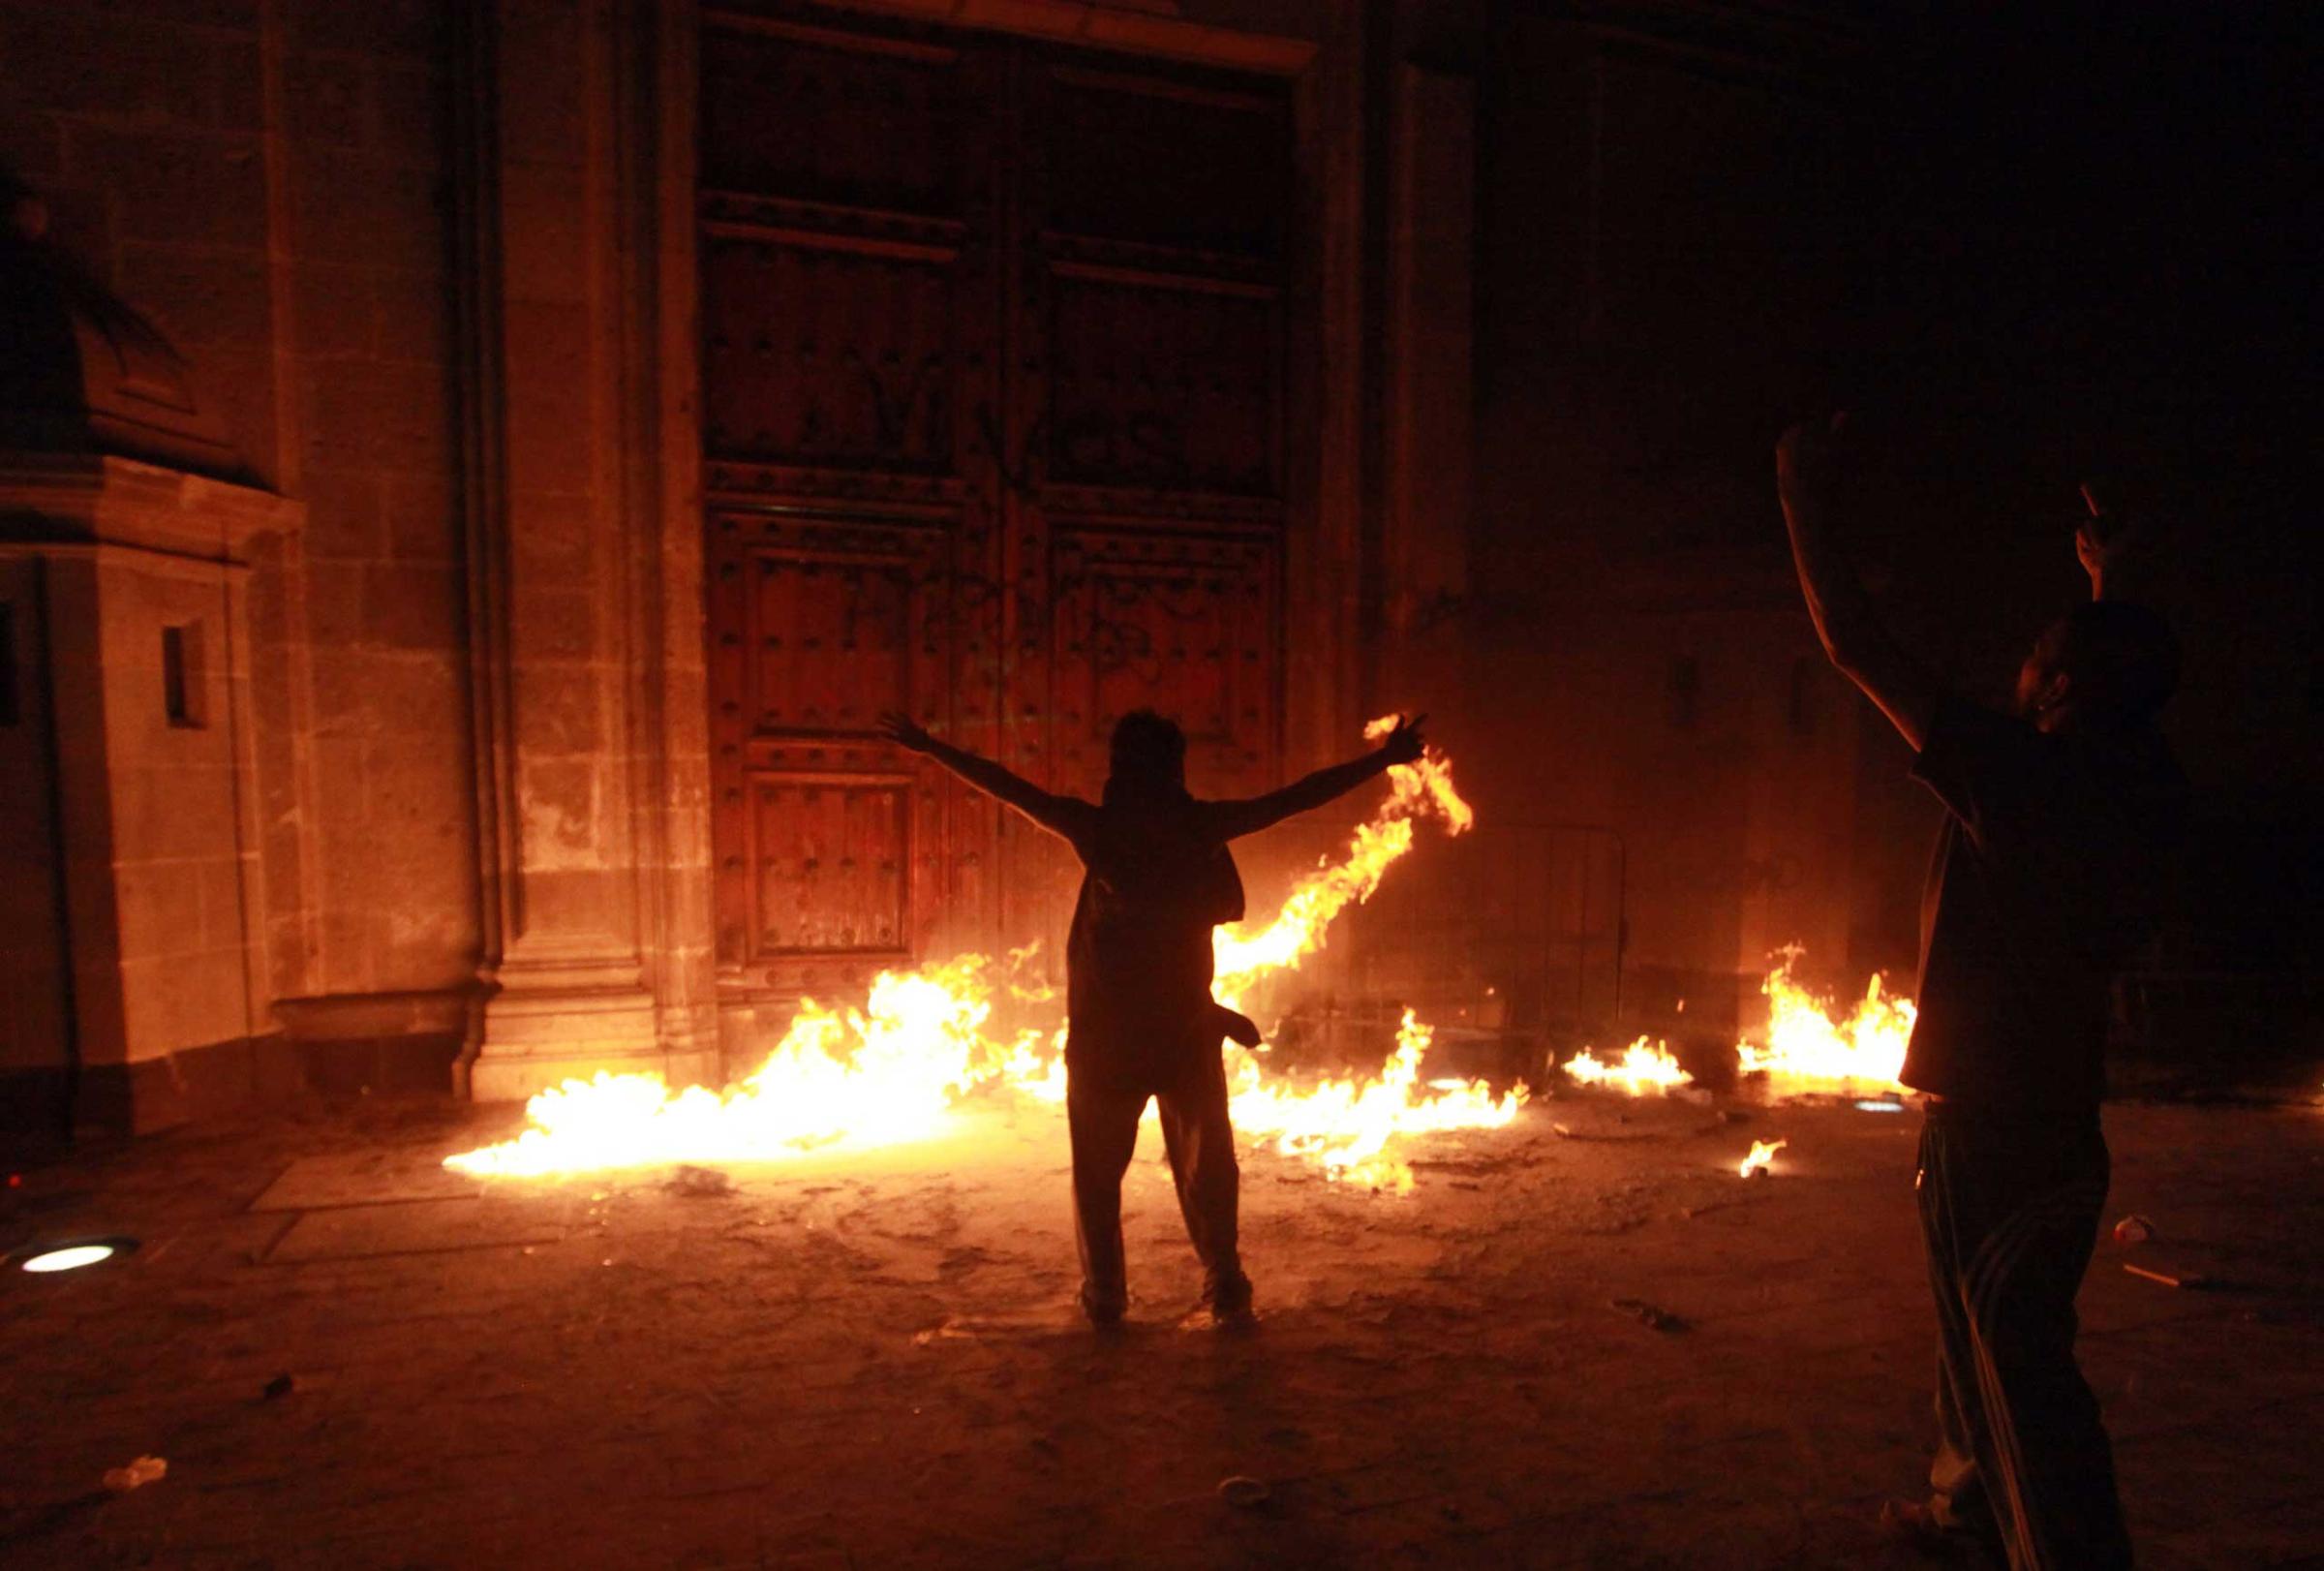 Demonstrators set on fire a door of the National Palace in Mexico City, Nov. 8, 2014.